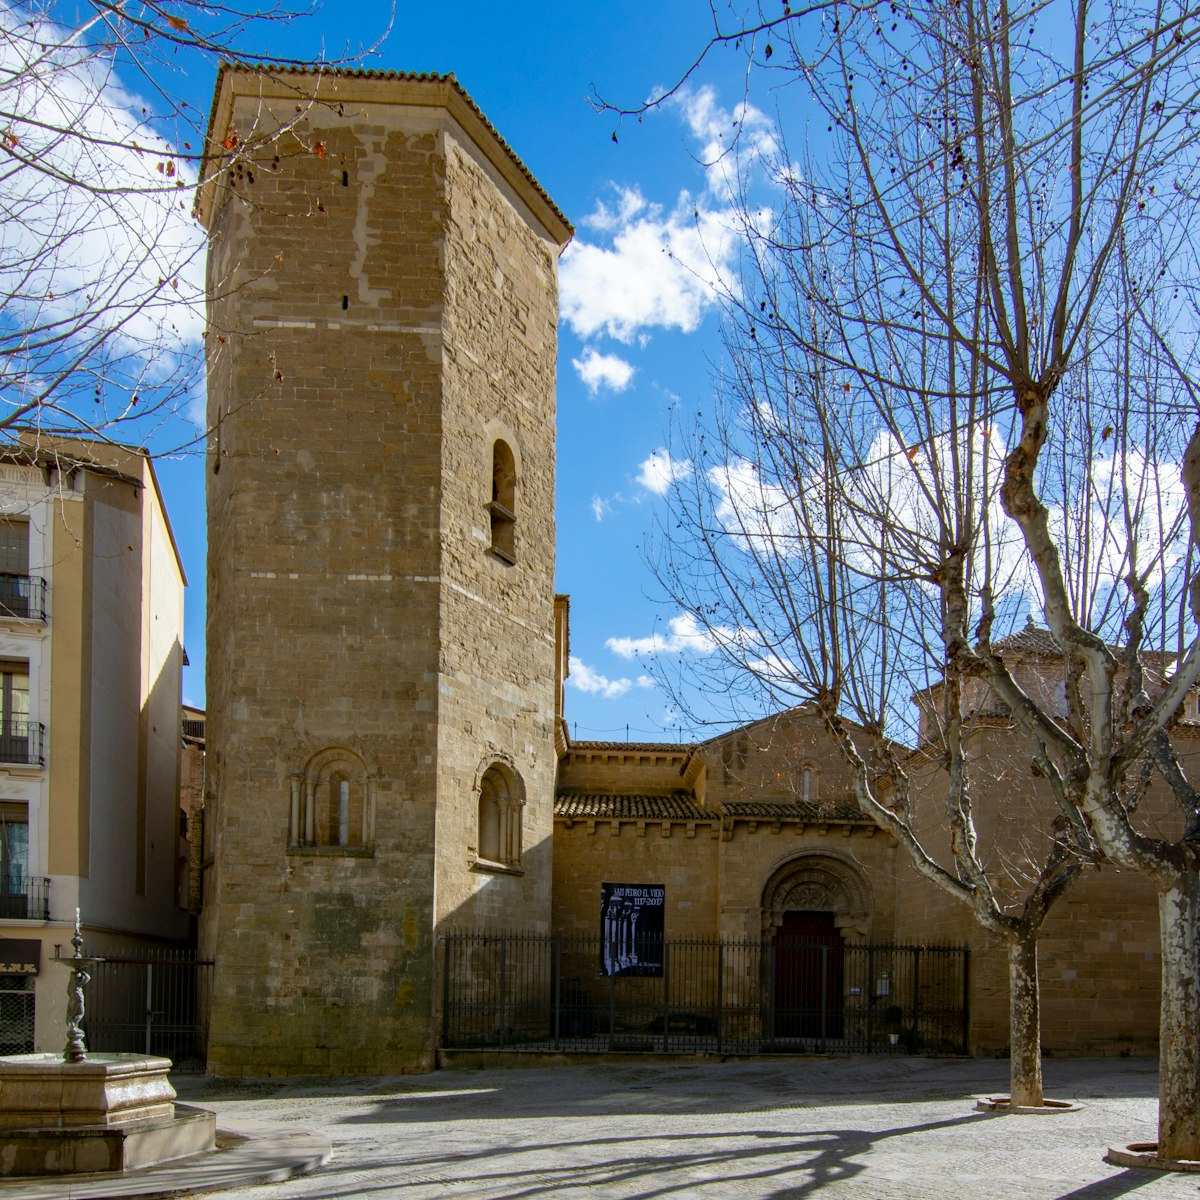 The bell tower and entrance of the church San Pedro in center historic of Huesca, Spain.